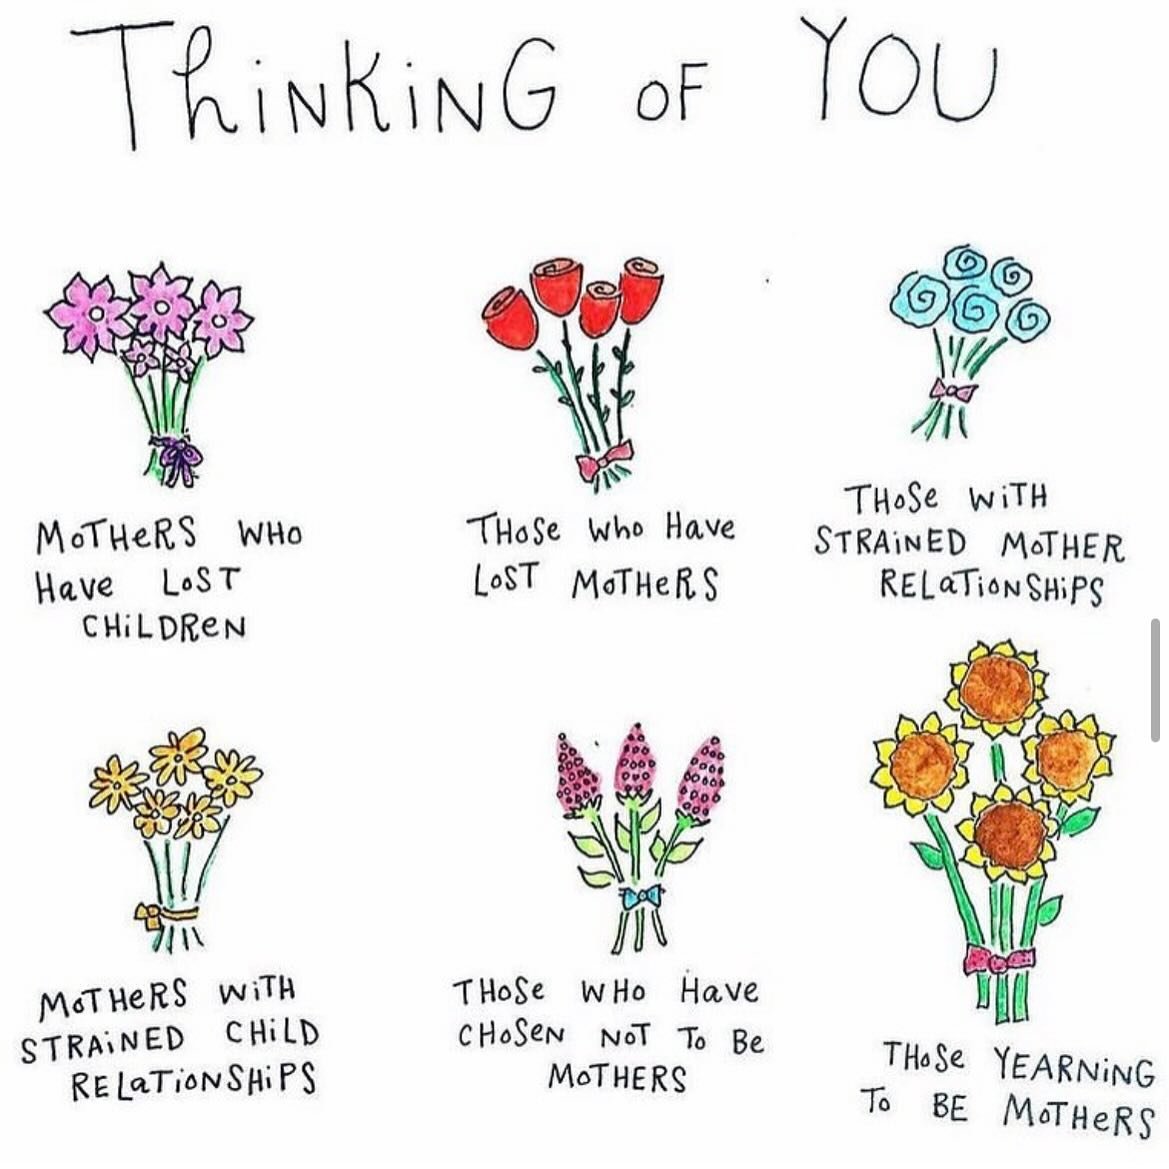 Happy Mother&rsquo;s Day SCS! We are so lucky to have so many Mumma&rsquo;s, Aunties, Big and little sisters in our sisterhood! 

We also think on this day of our incredible mothers and sisters in Gaza ❤️❤️❤️
@walaa._.talaa @marwa_3eta @reham_jarrah 